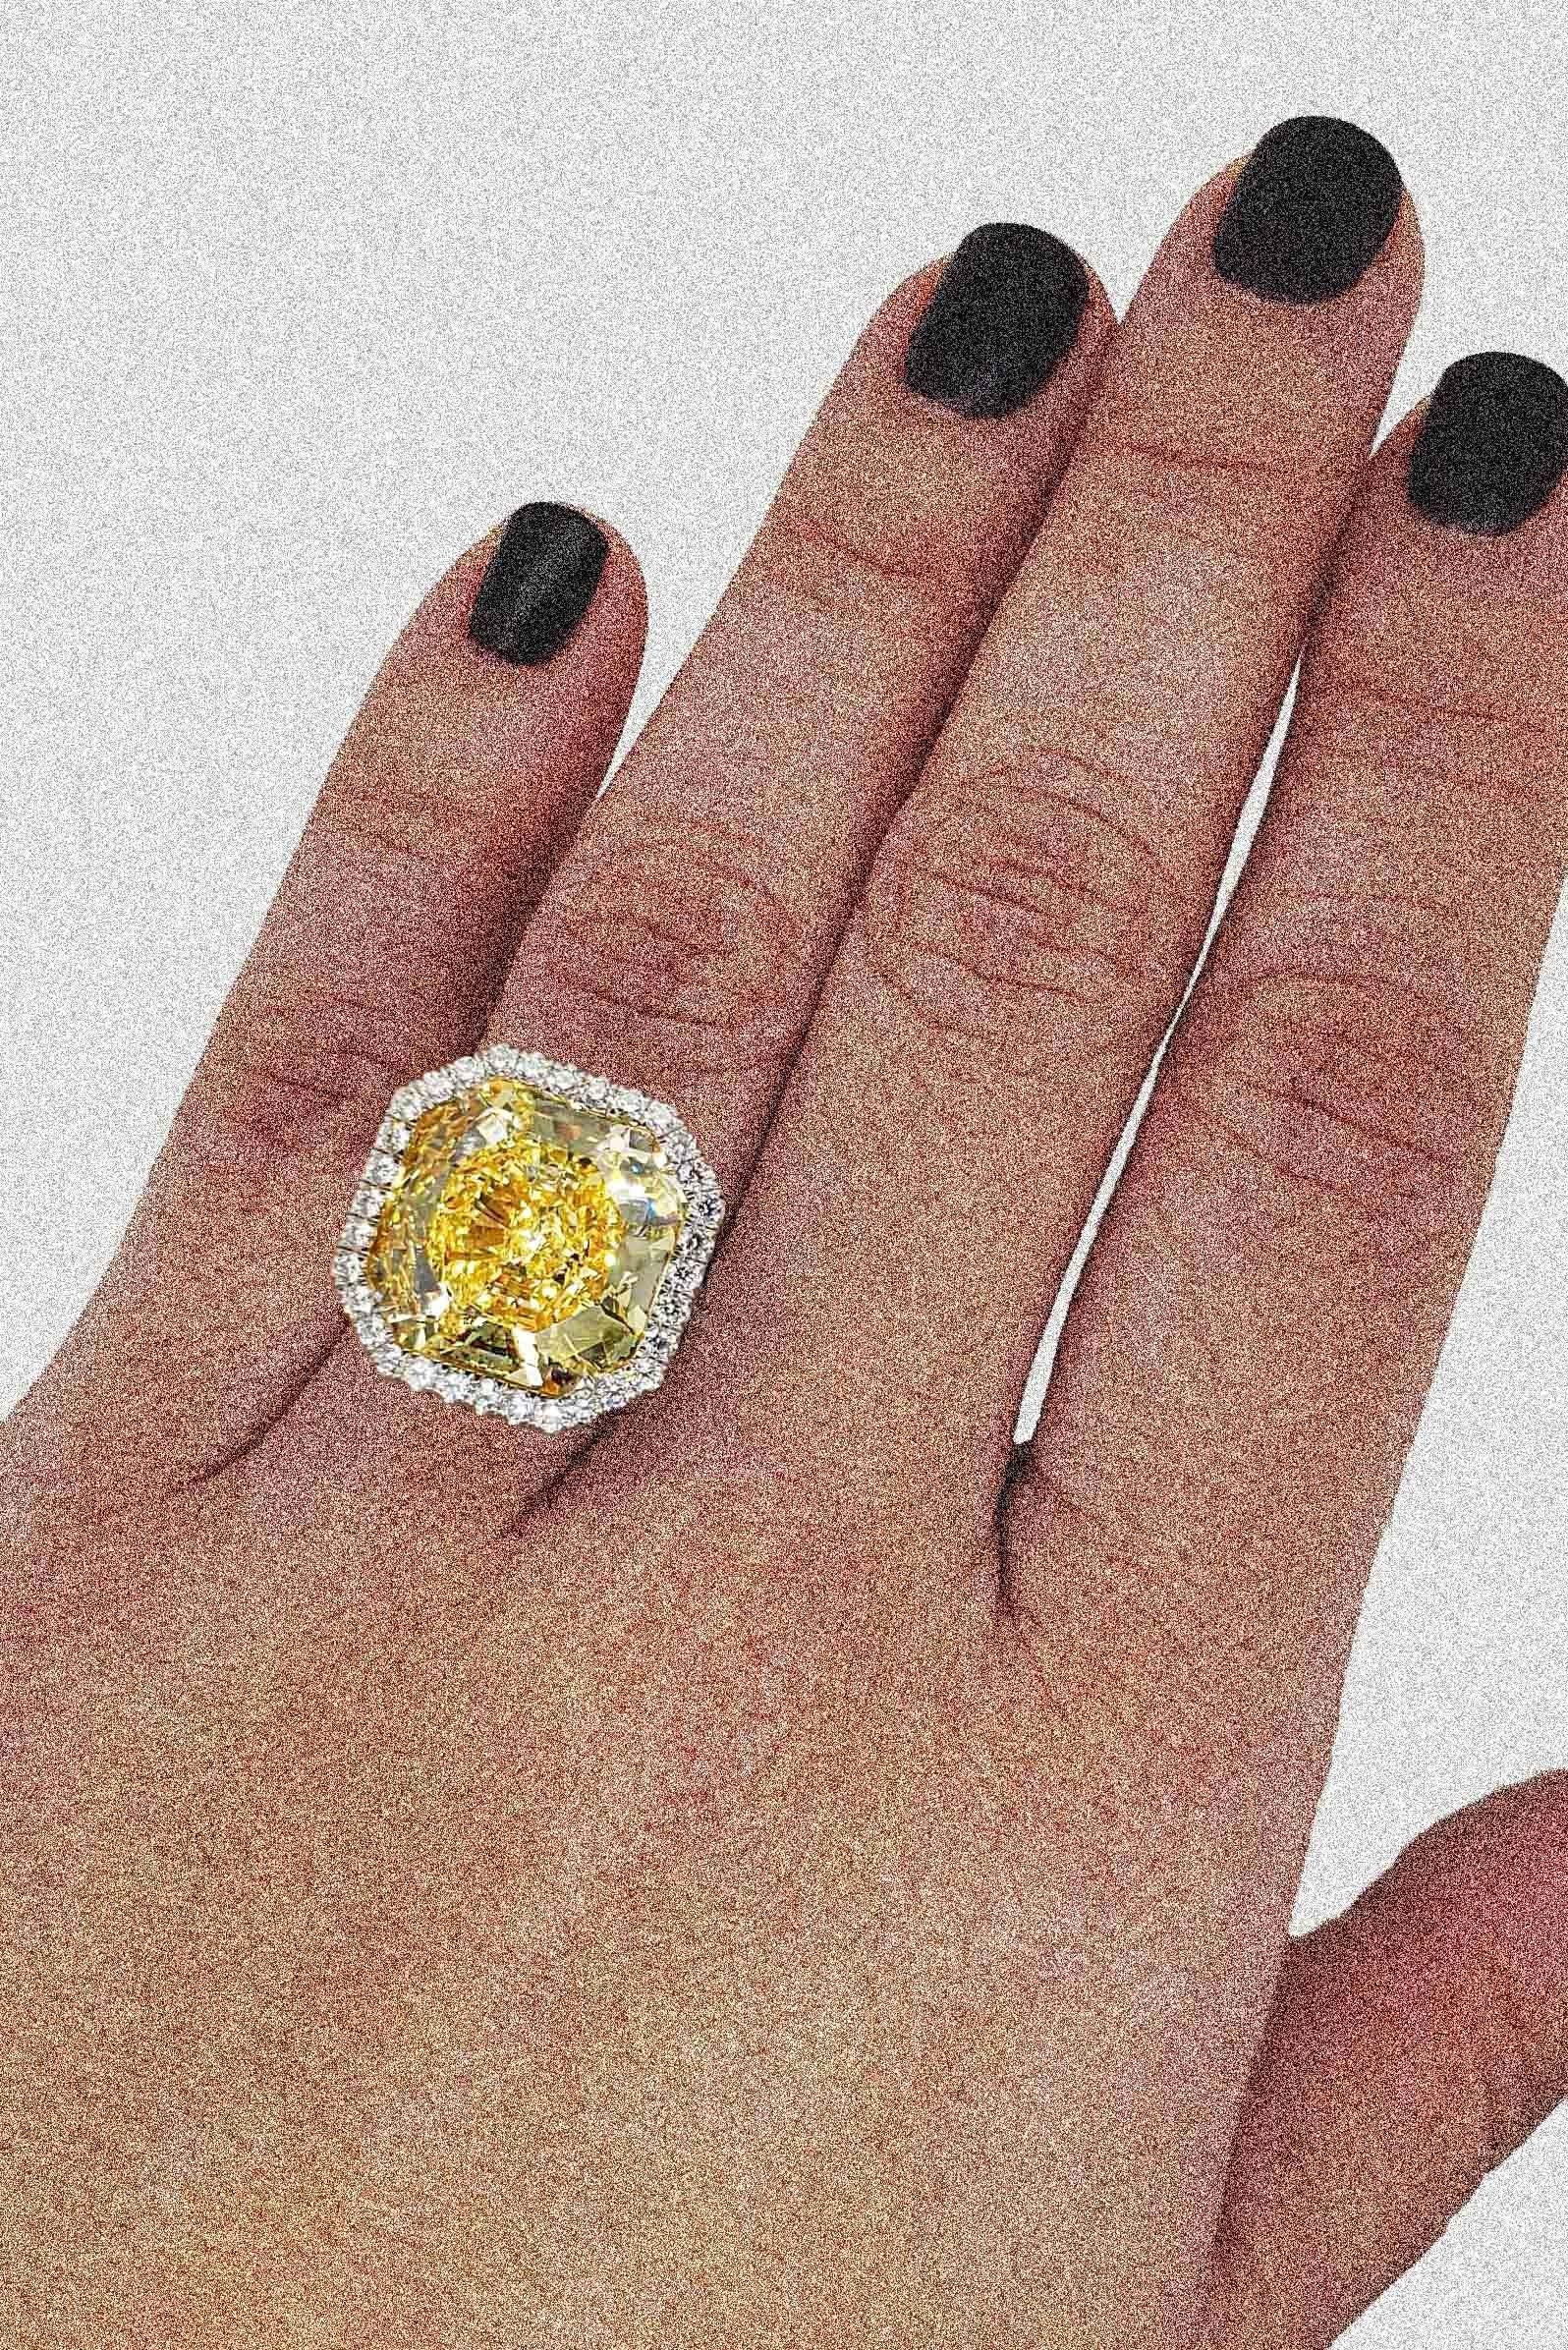 Radiant Cut Scarselli 15 Carat Fancy Intense Yellow Diamond Ring Internally Flawless GIA For Sale